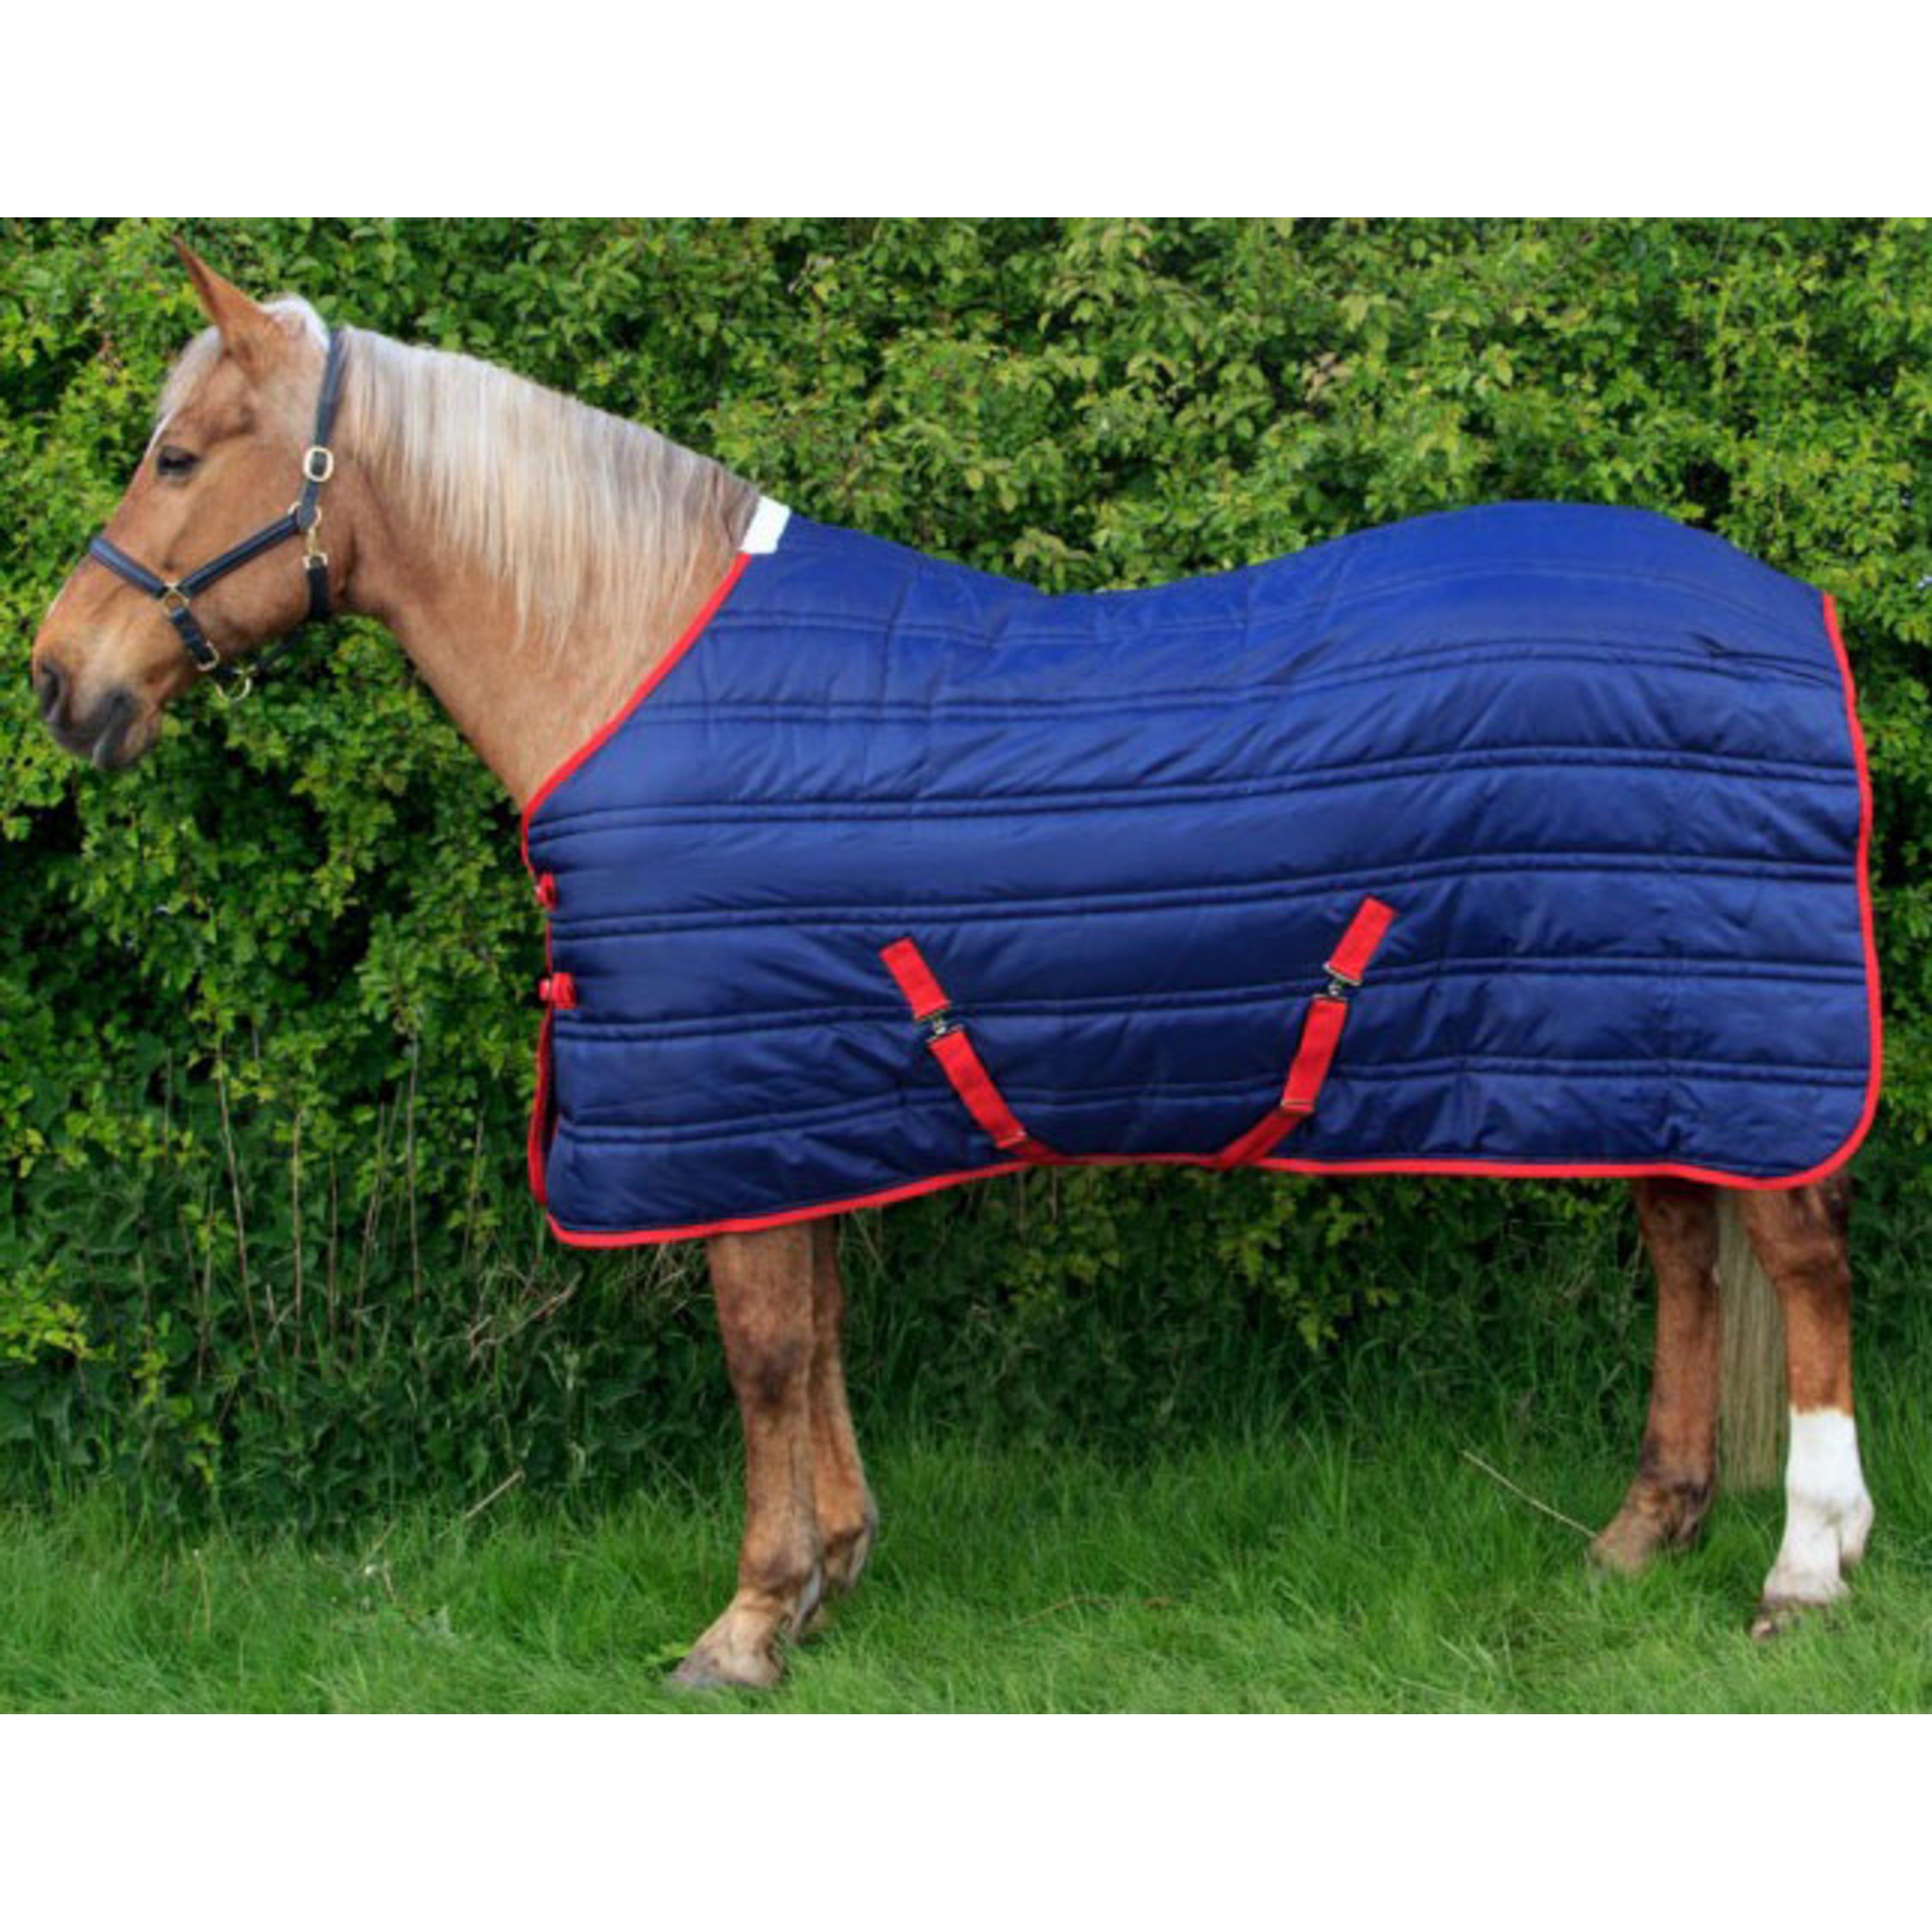 Whitaker Thomas Stable Rug Review